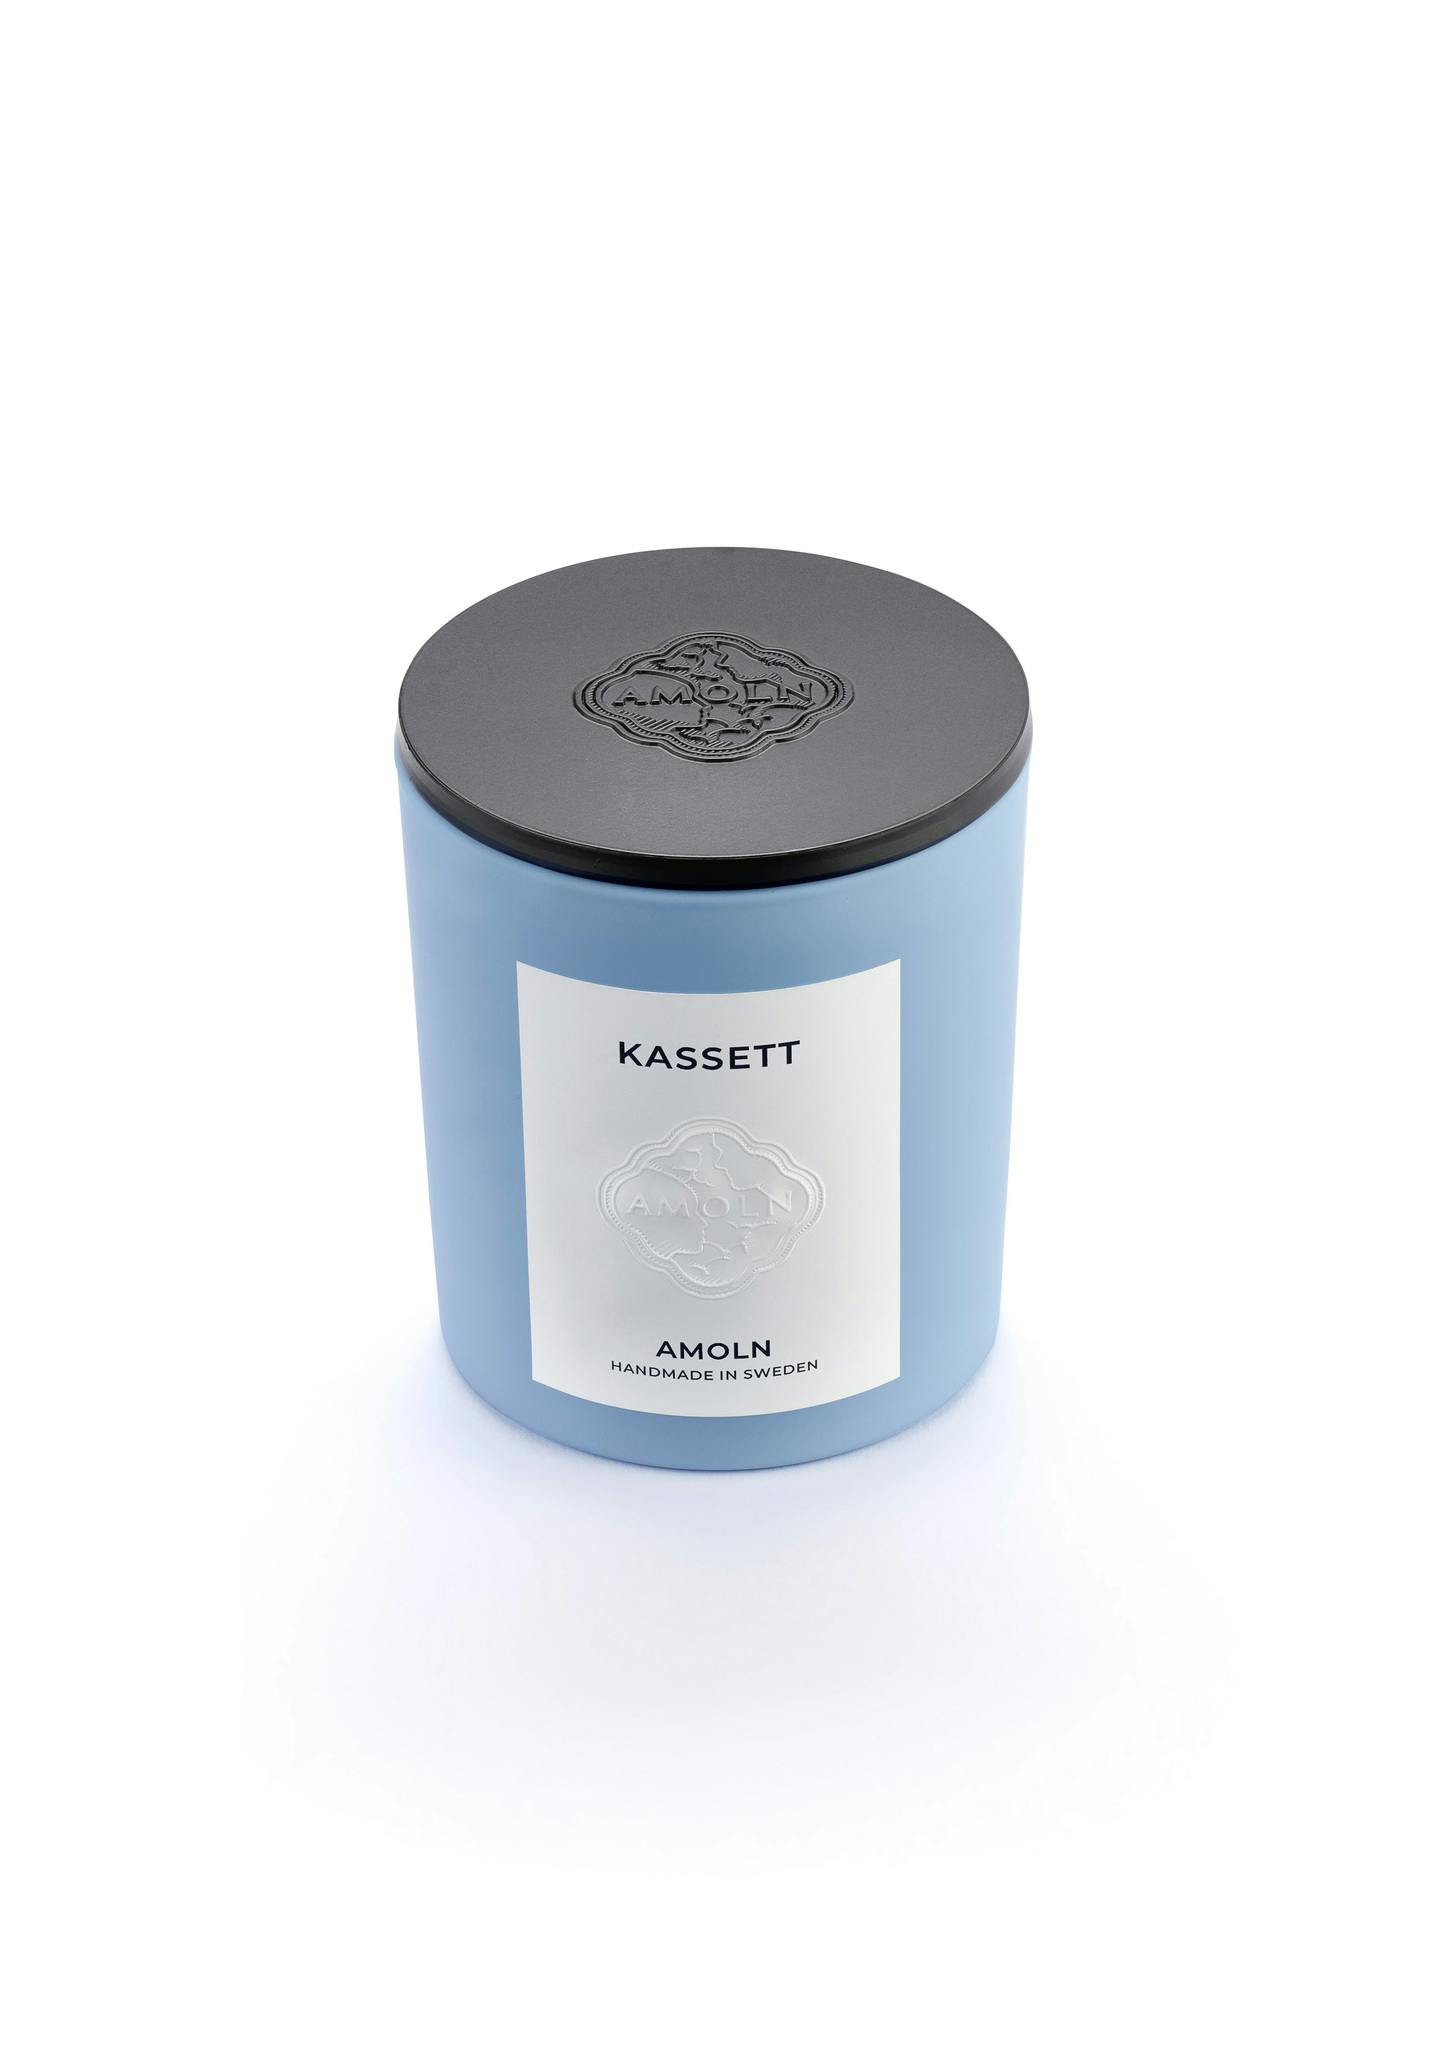 Light blue ceramic candle jar with a vegan, scented candle in blue wax with black metal lid. Handcrafted by artisans in Sweden. Sustainably & ethically made.